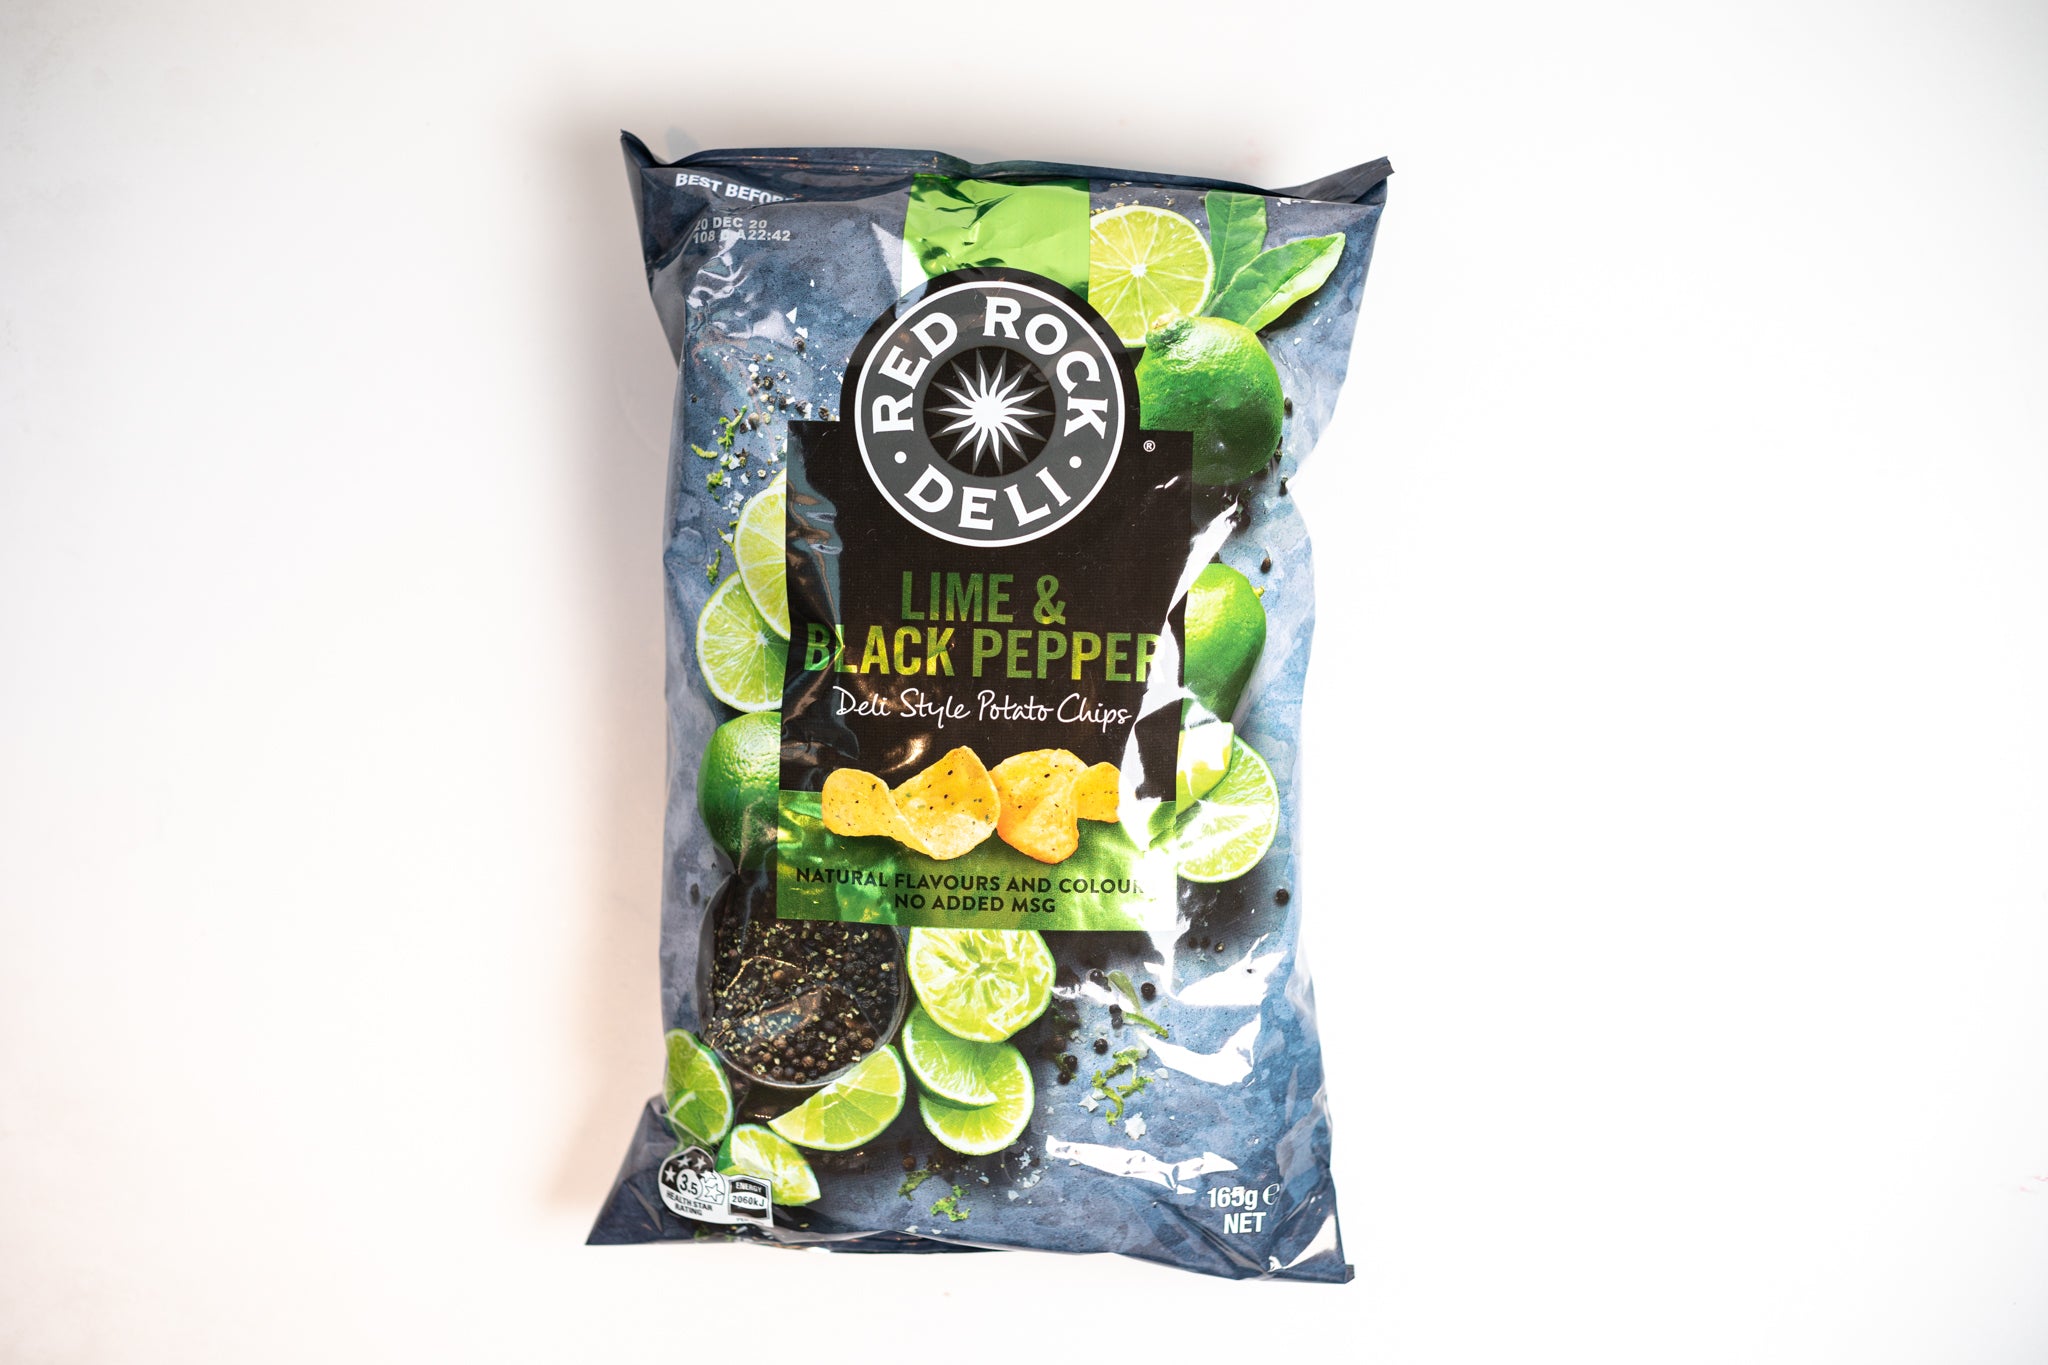 A packet of Red Rock Deli Potato Chips - Lime & Black Pepper.